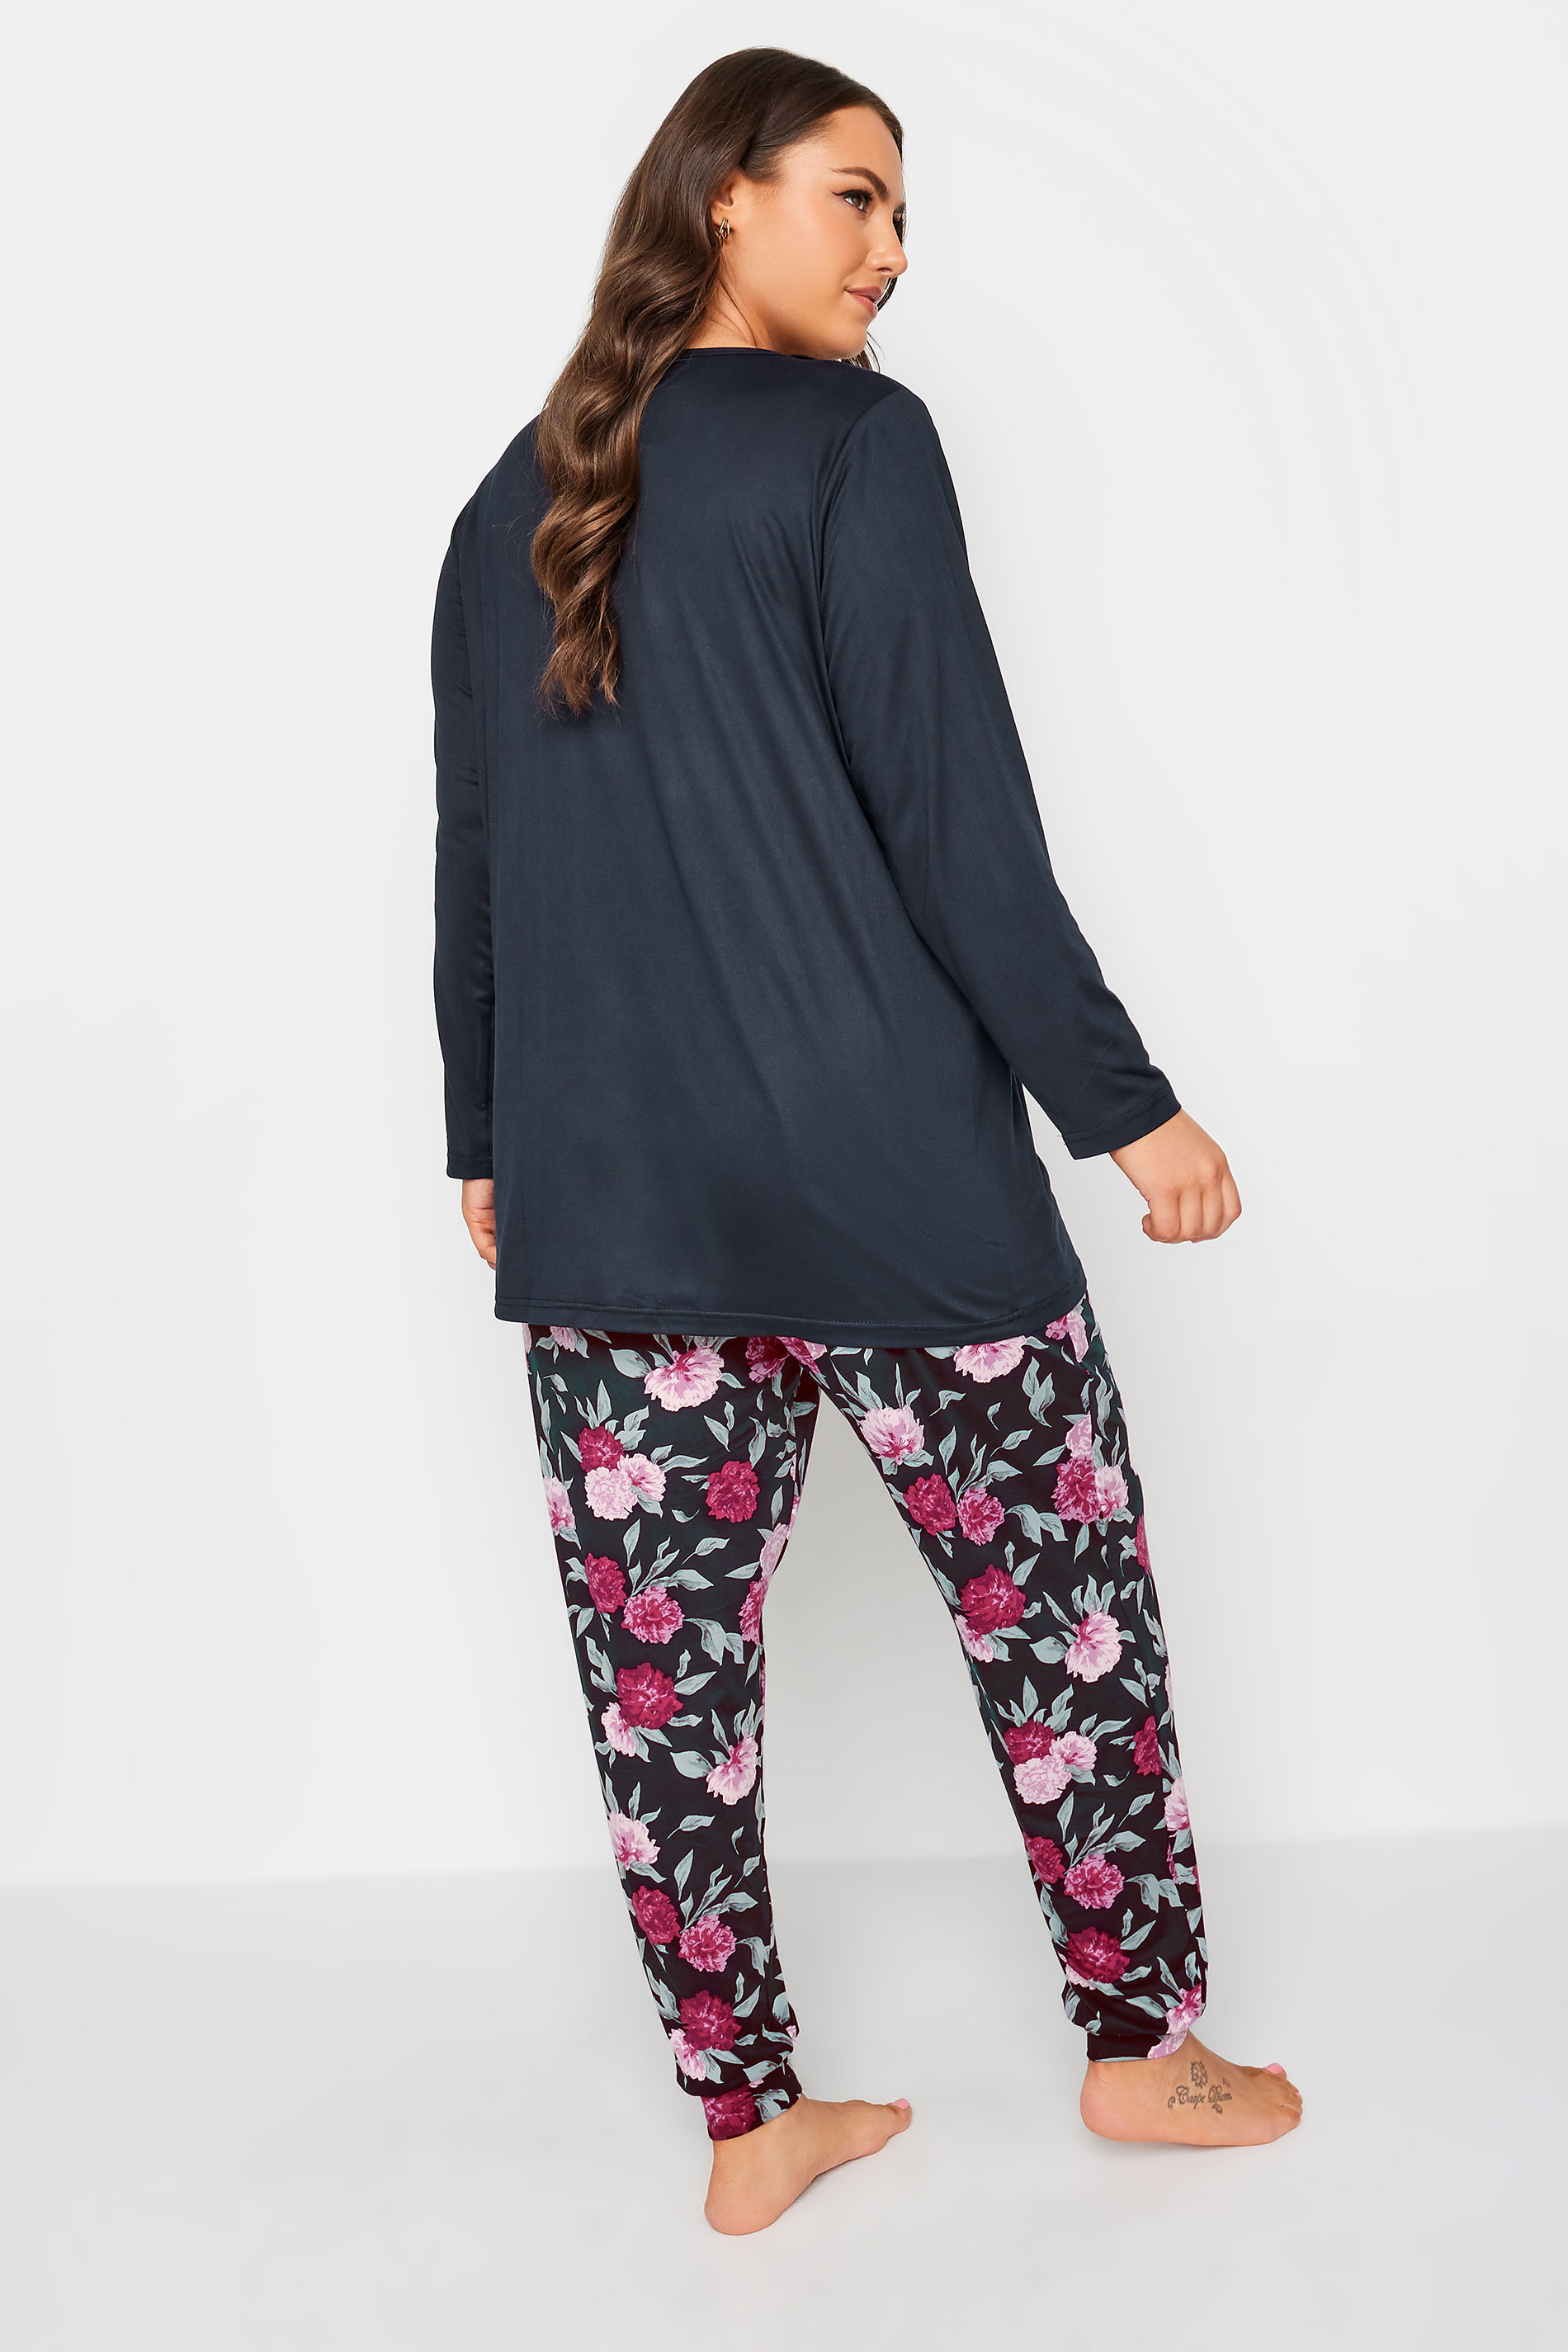 YOURS Curve Navy Blue Floral Print Soft Touch Pyjama Set | Yours Clothing 3